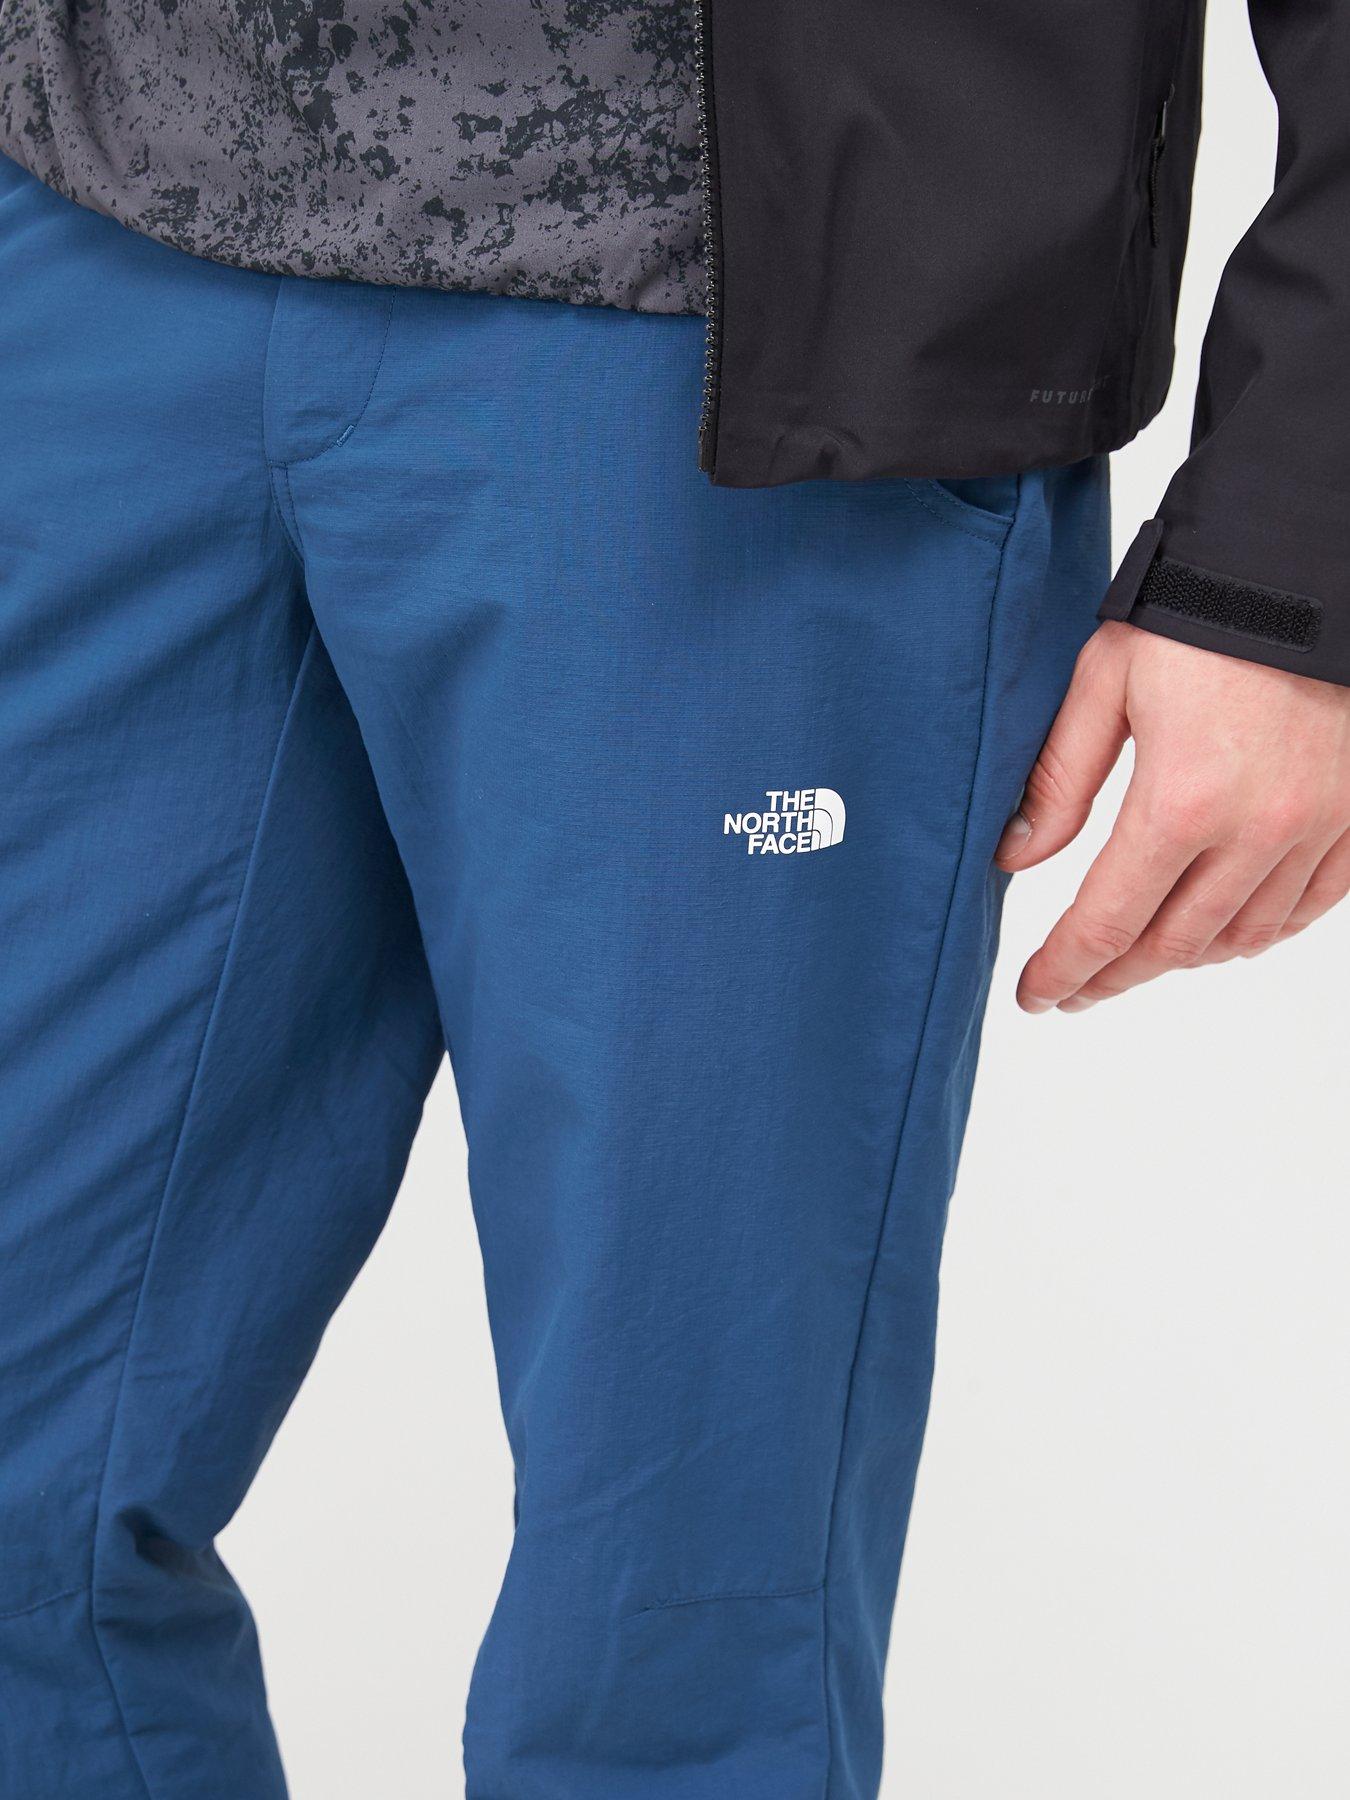 north face tanken trousers